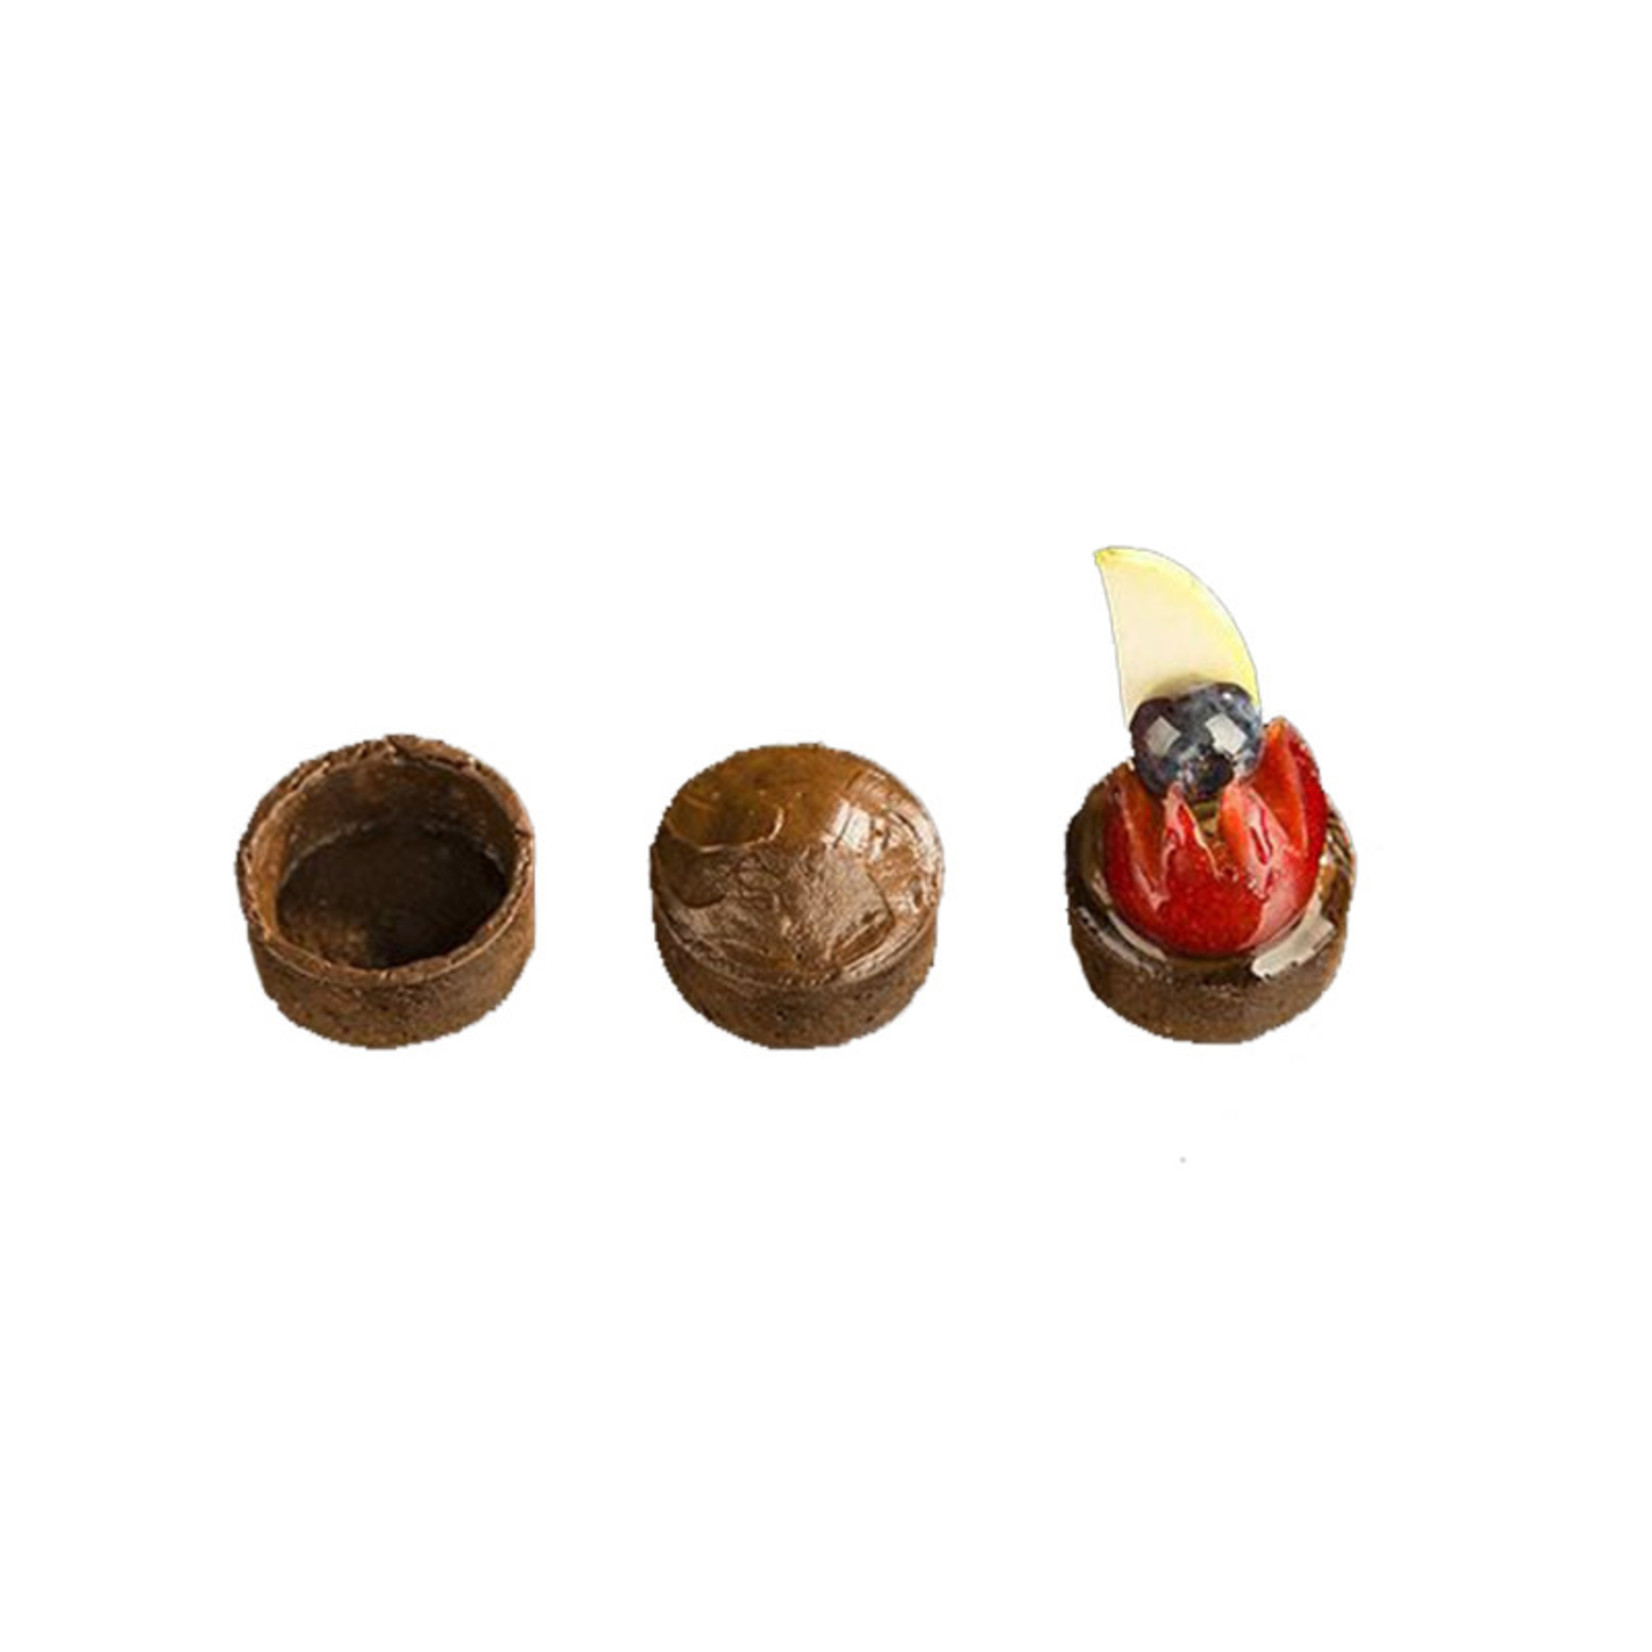 Le Chic Patissier Le Chic Patissier - Tart shell, Chocolate round - 1.5'' (48ct) sleeve, 78448-S